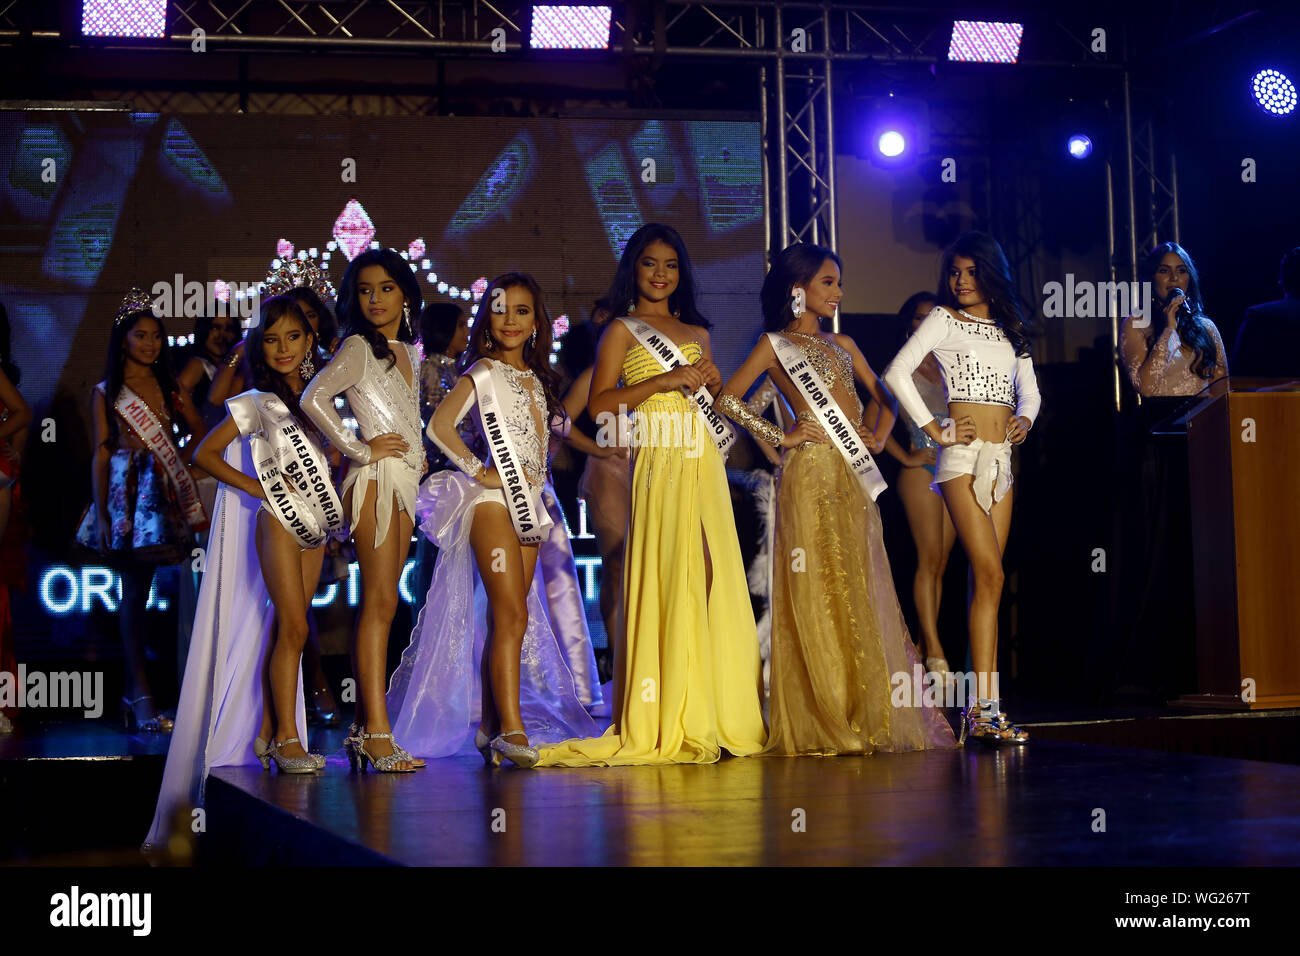 Smidighed Flåde Celebrity Valencia, Carabobo, Venezuela. 30th Aug, 2019. August 30, 2019. Beauty  contest, Miss mini Carabobo, It is a beauty contetst for baby models, the  winner will represent the Carabobo state in the national